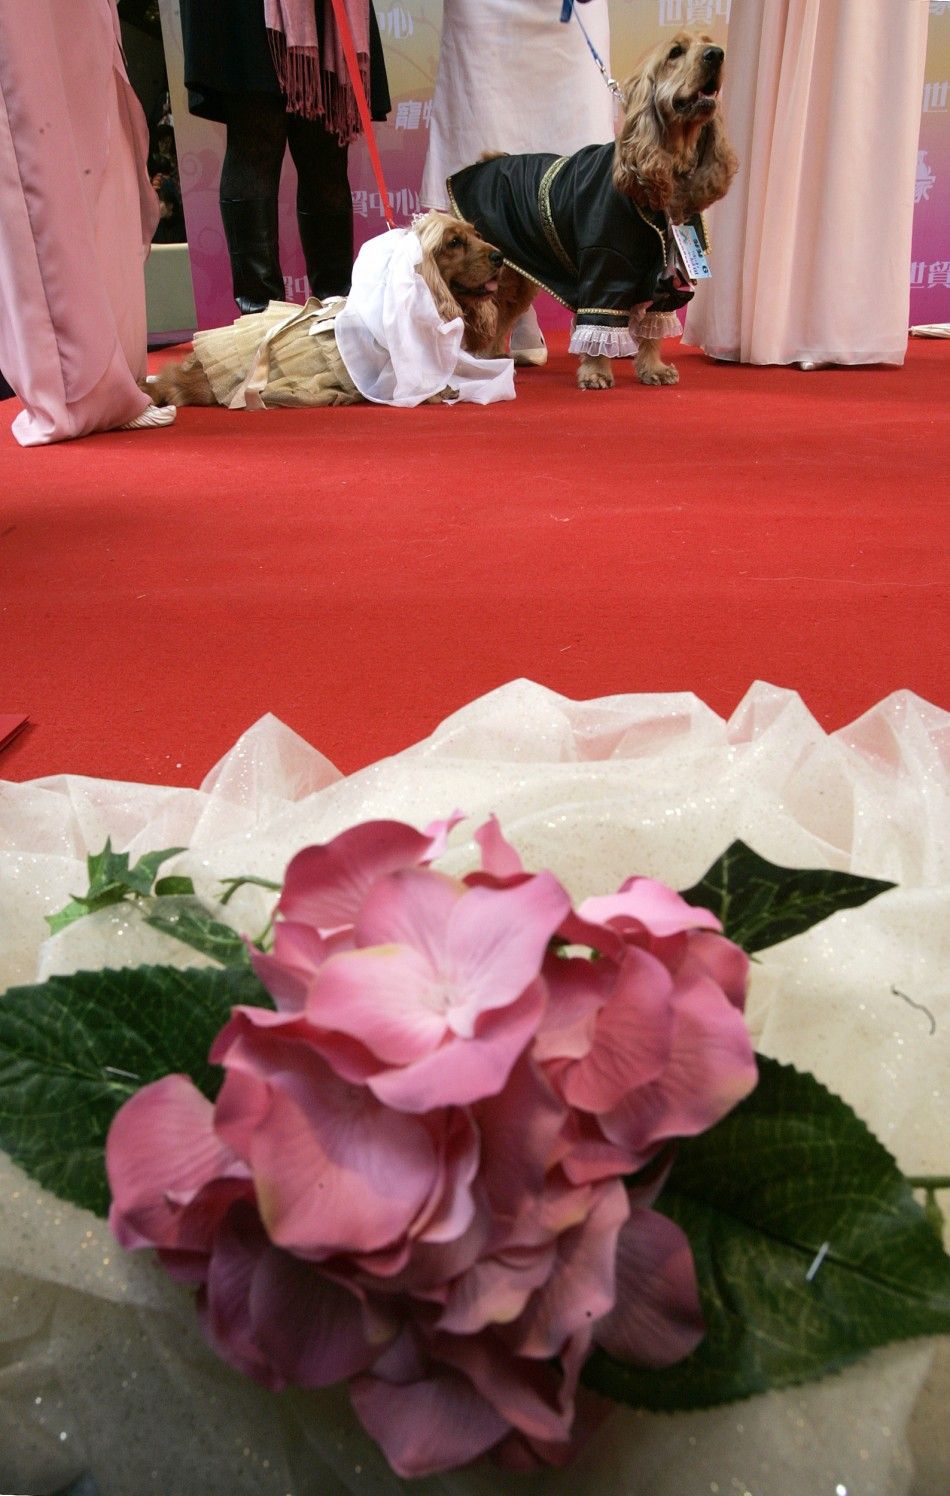 Dogs dressed as a bride and groom take part in a wedding ceremony for pets during Valentines Day celebrations at a shopping mall in Hong Kong